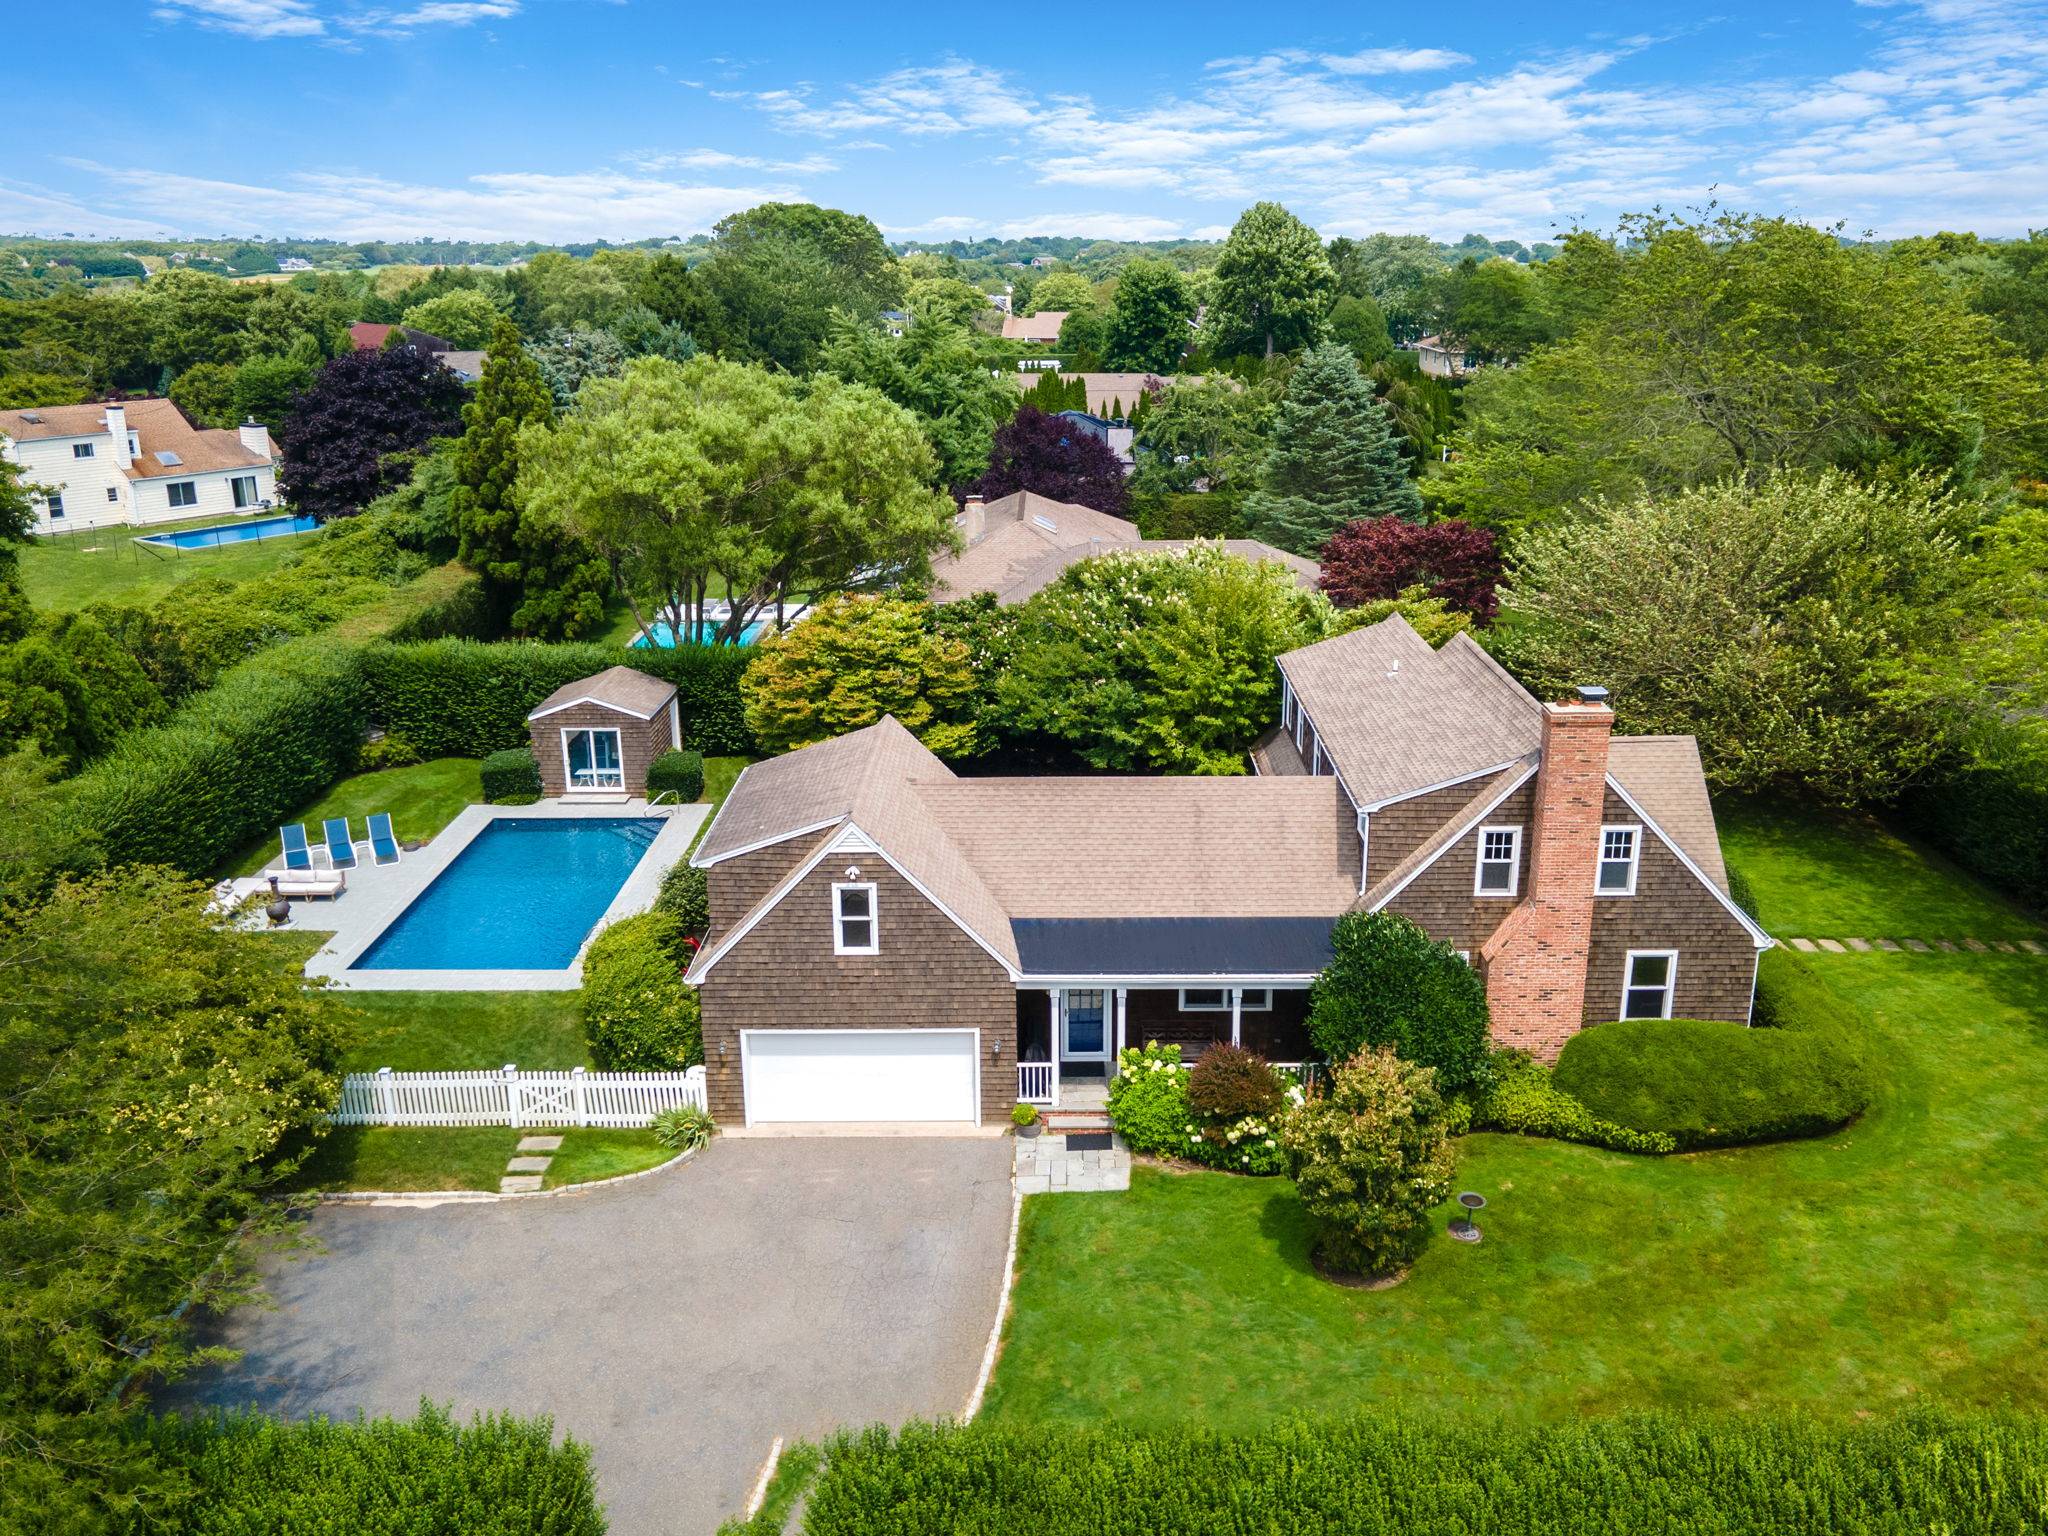 Stunning Hamptons Home with Private Pool and Lush Landscapes